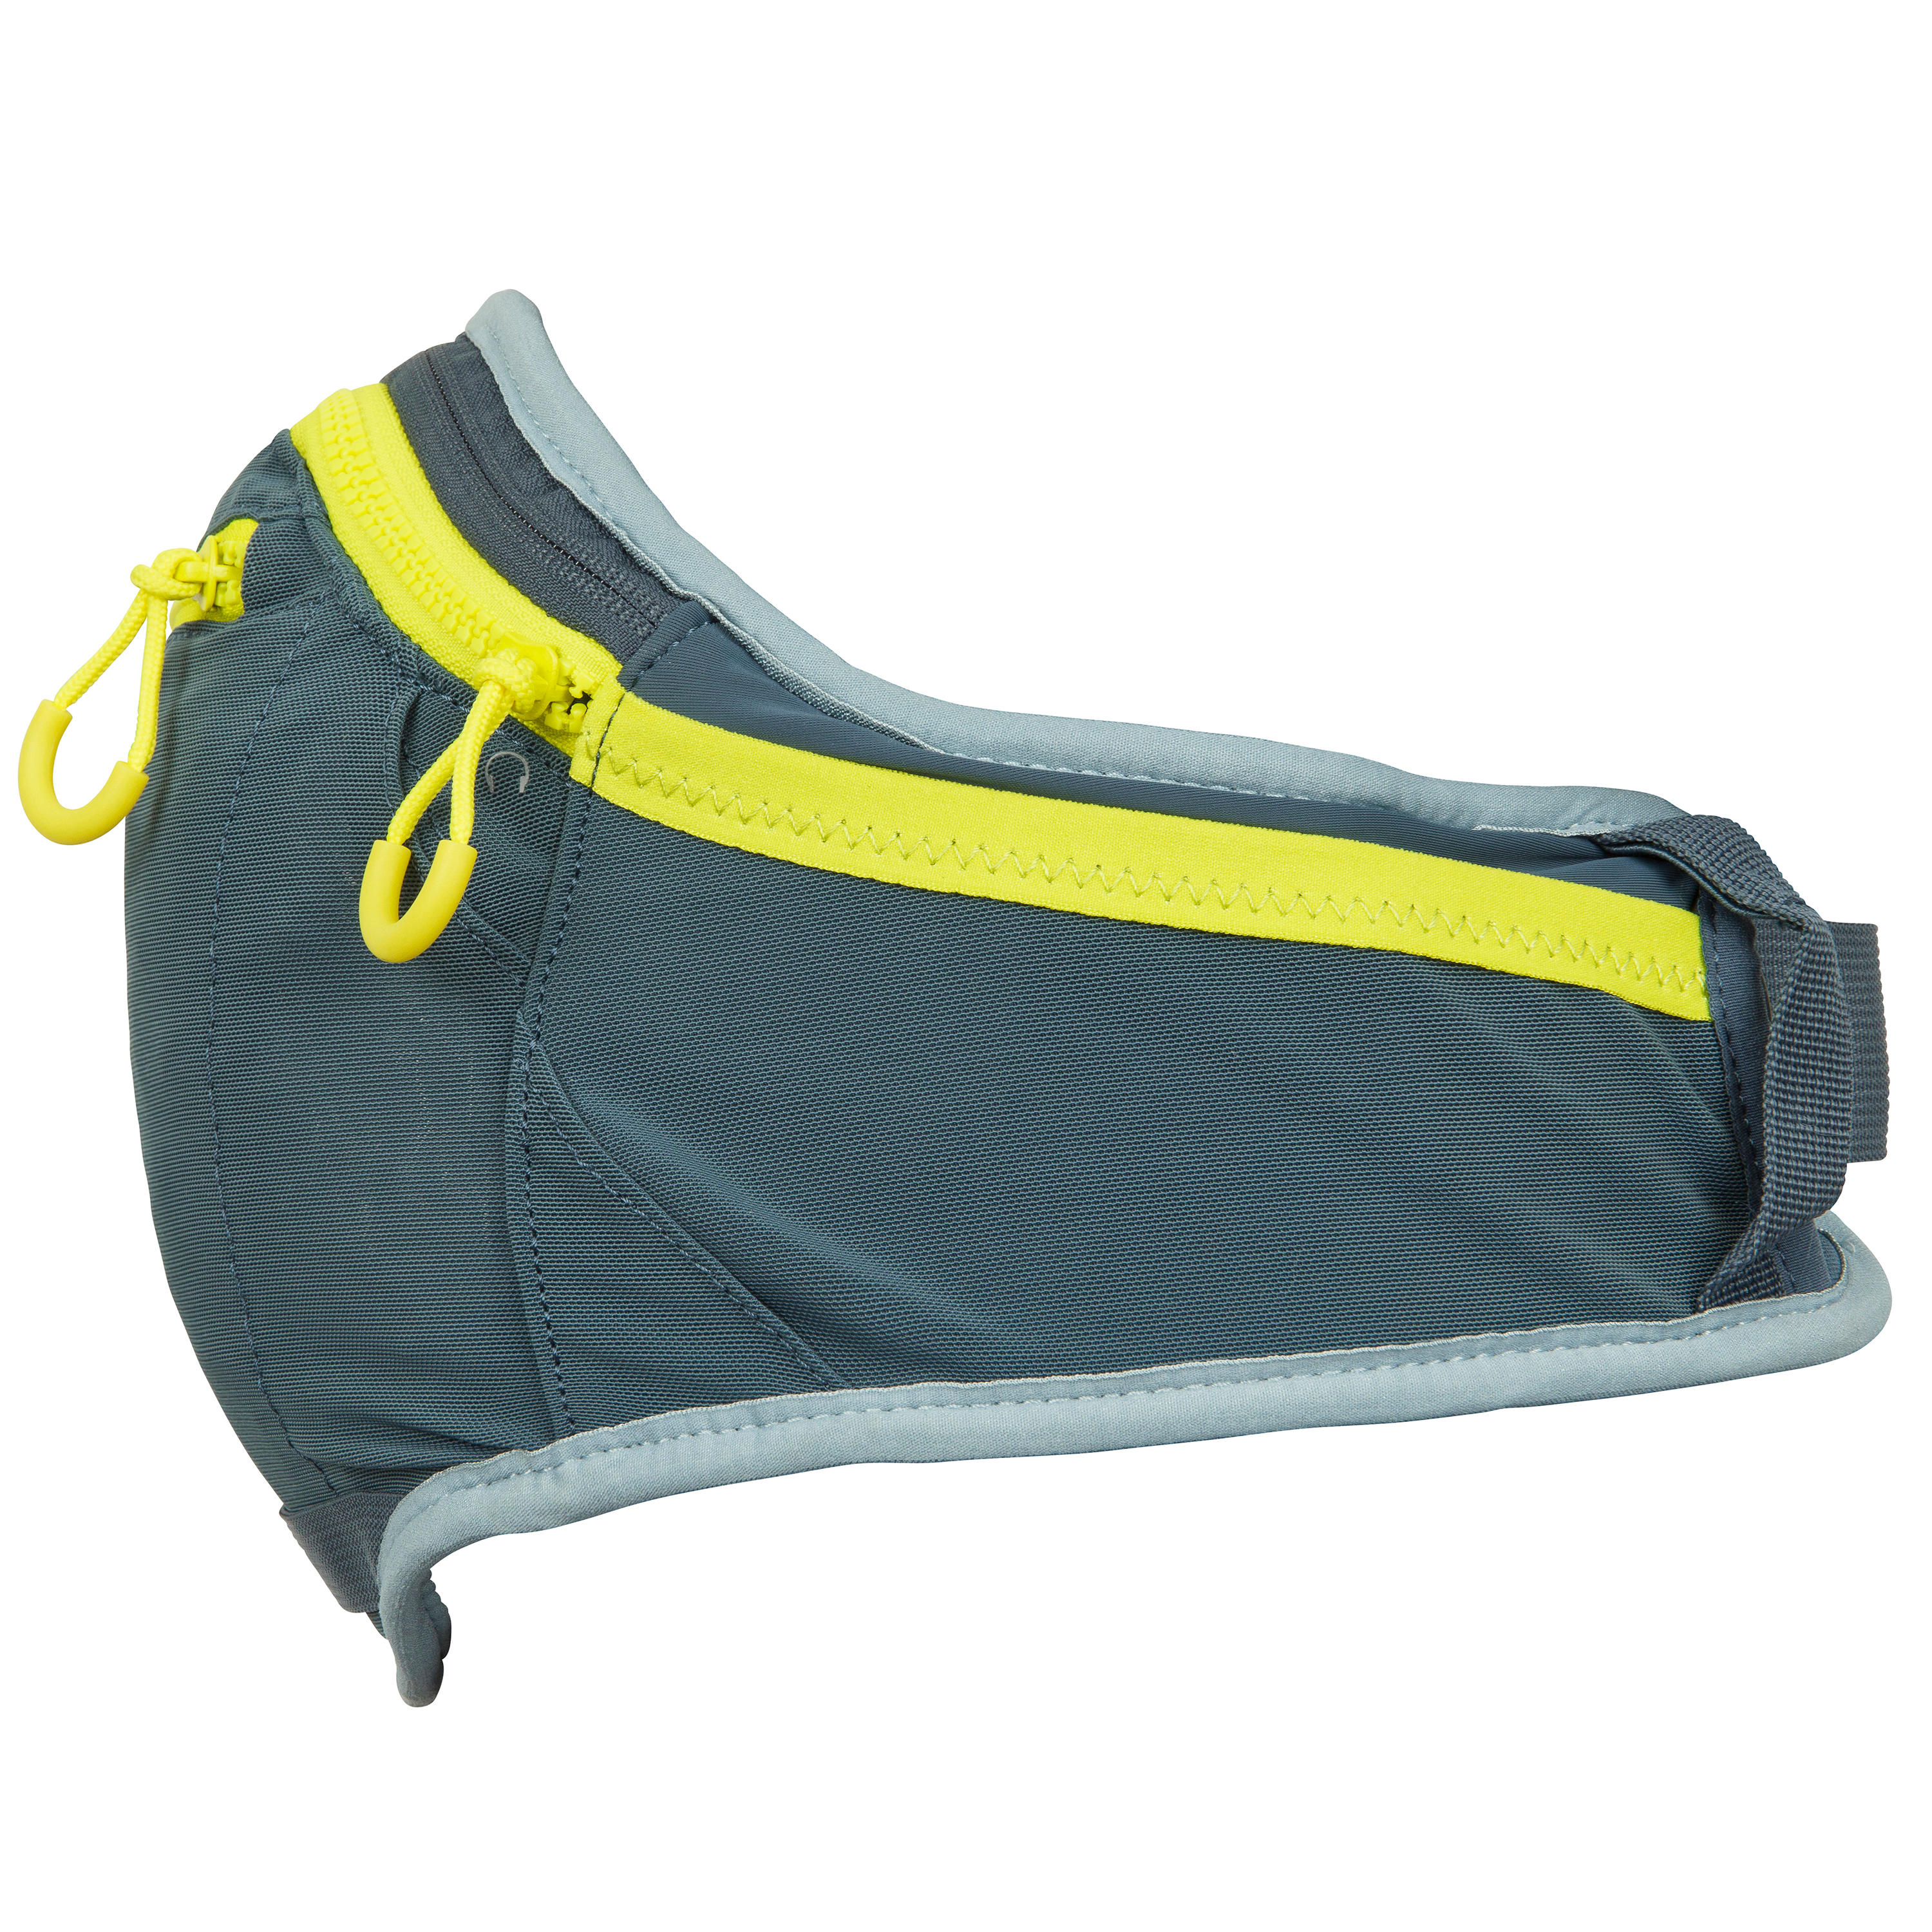 1.5 Litre Hydration Belt For Stand-Up Paddle Racing 7/19